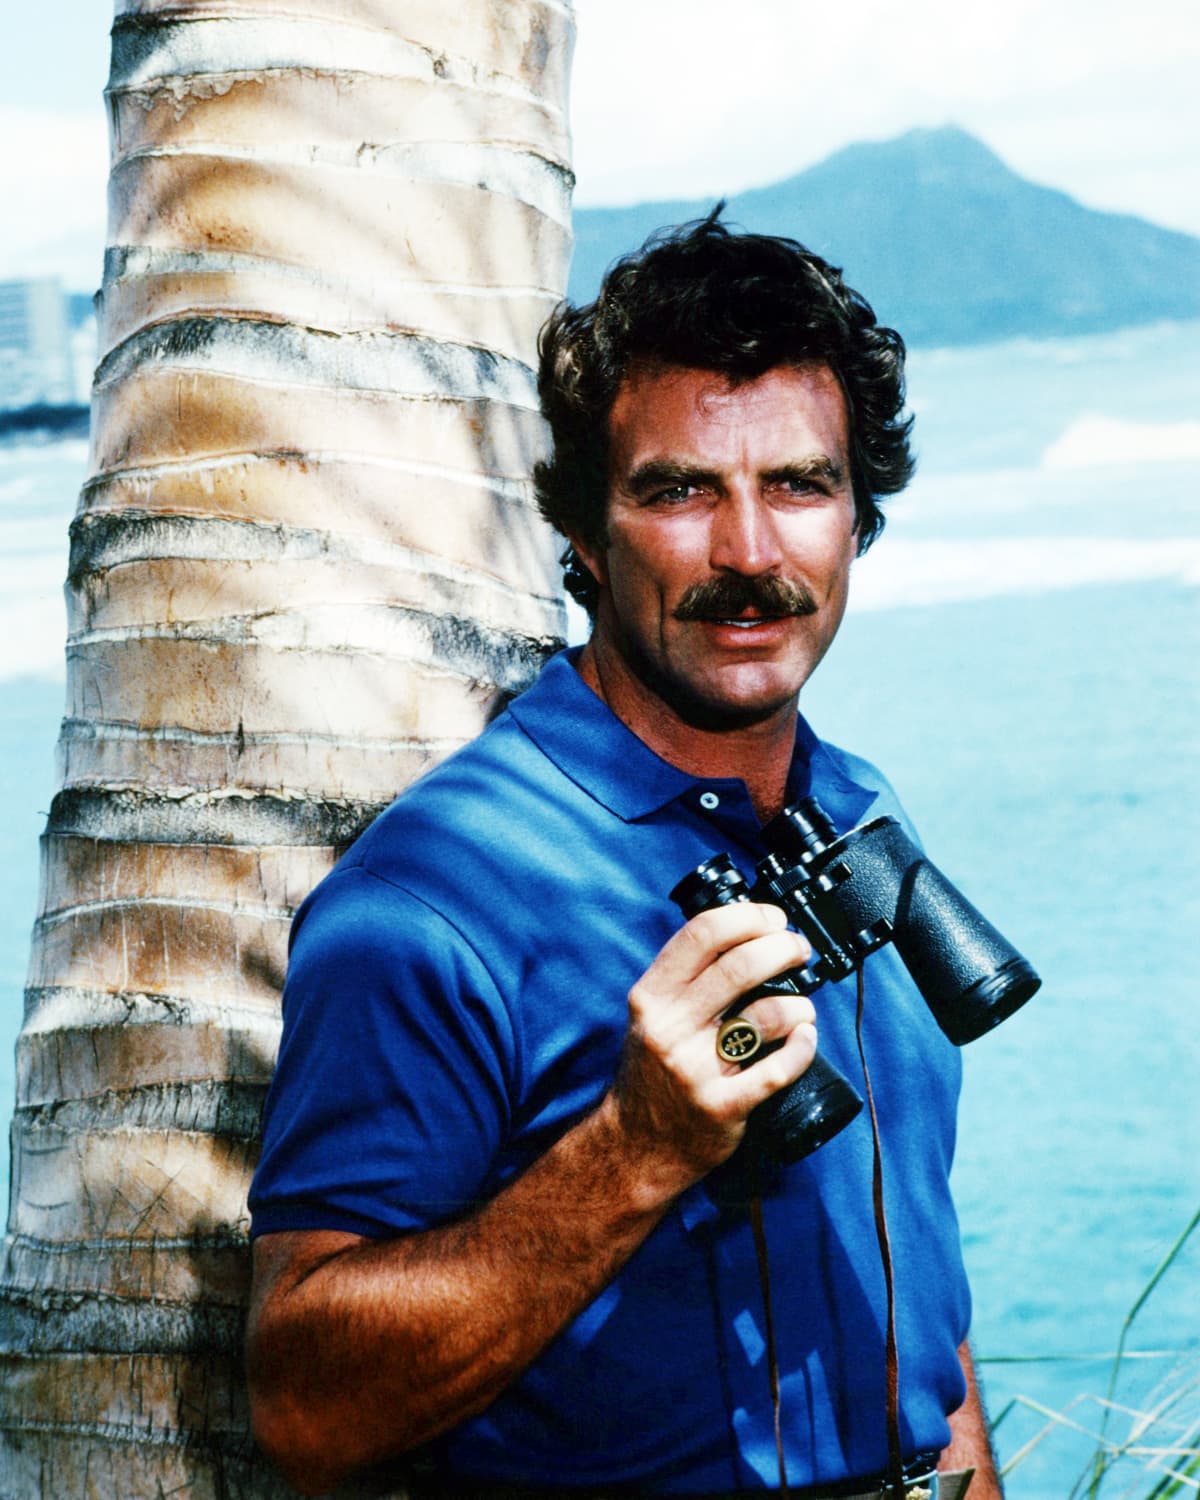 American actor Tom Selleck as he appears in the TV series 'Magnum P.I.', circa 1985. (Photo by Silver Screen Collection/Getty Images)